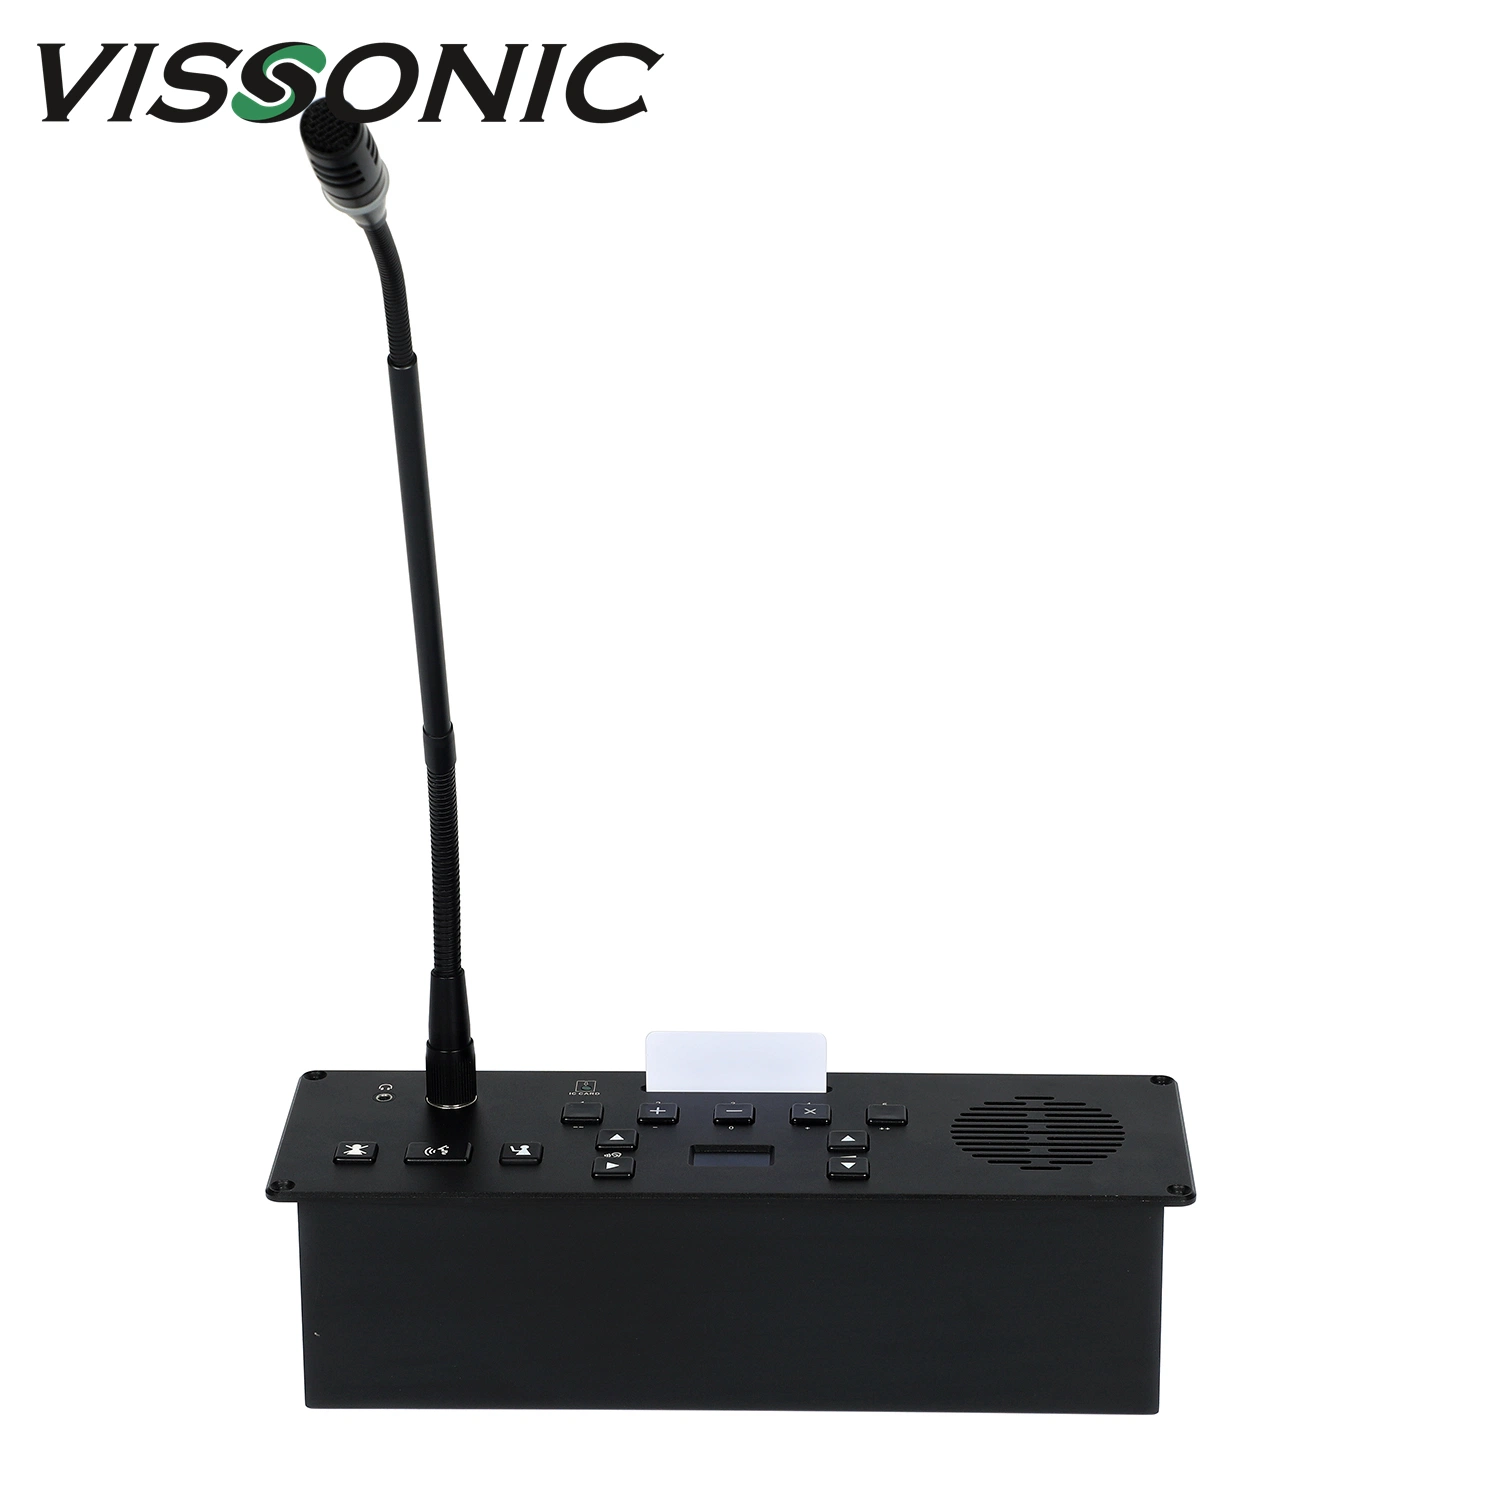 Full Digital Wired Conference System All-in-One Flush-Mounting Audio Microphones